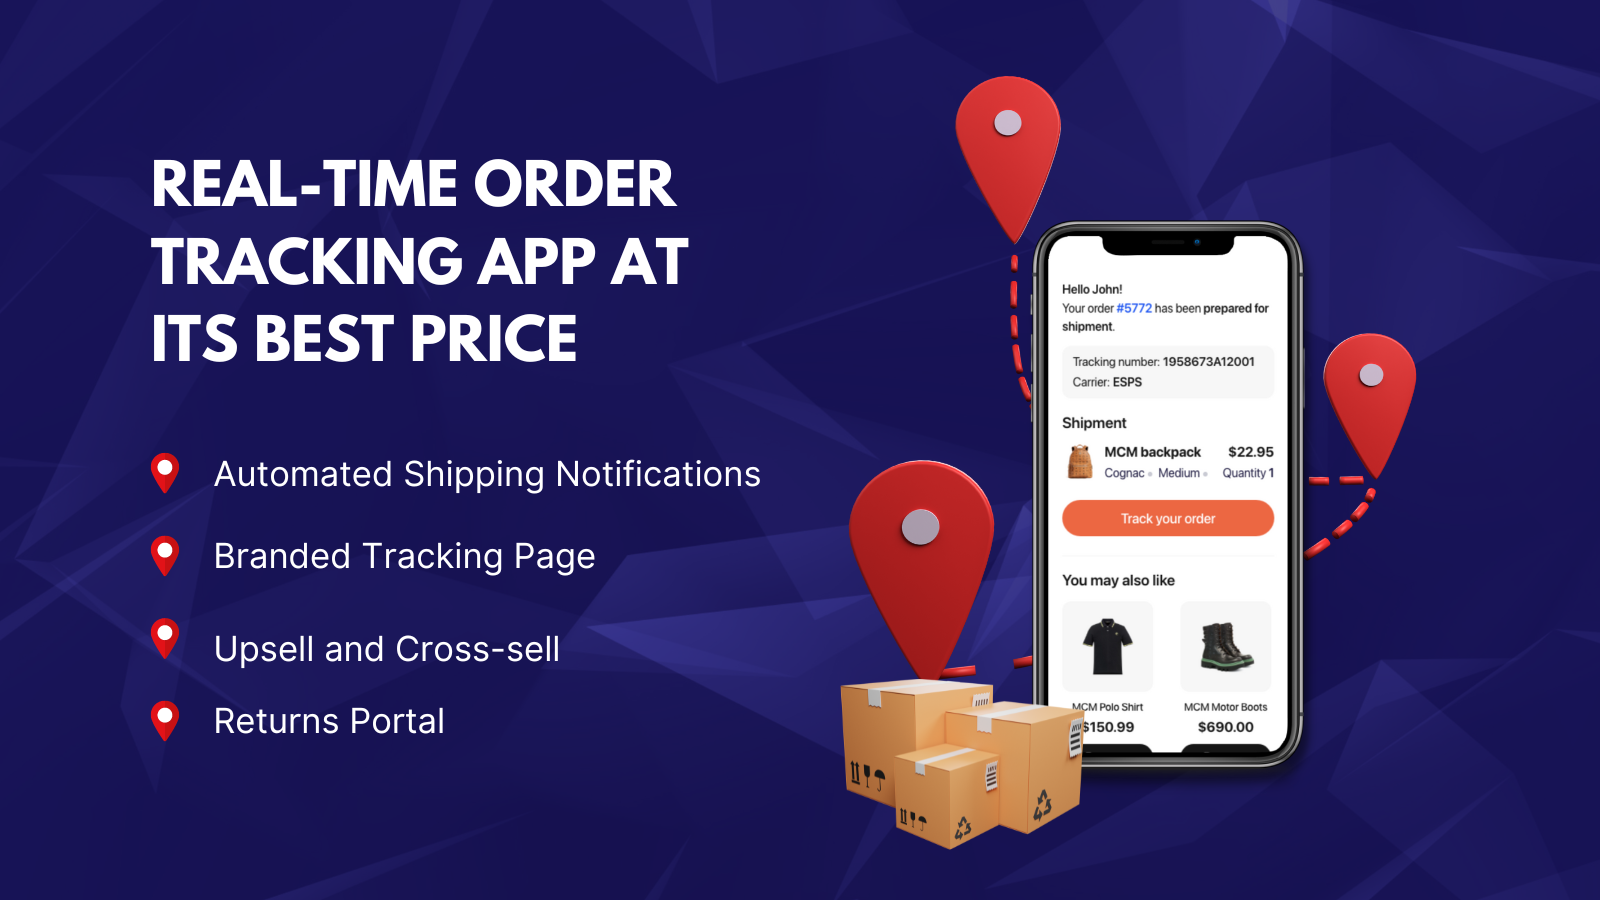 Trackr app's order tracker interface on detailed order tracking